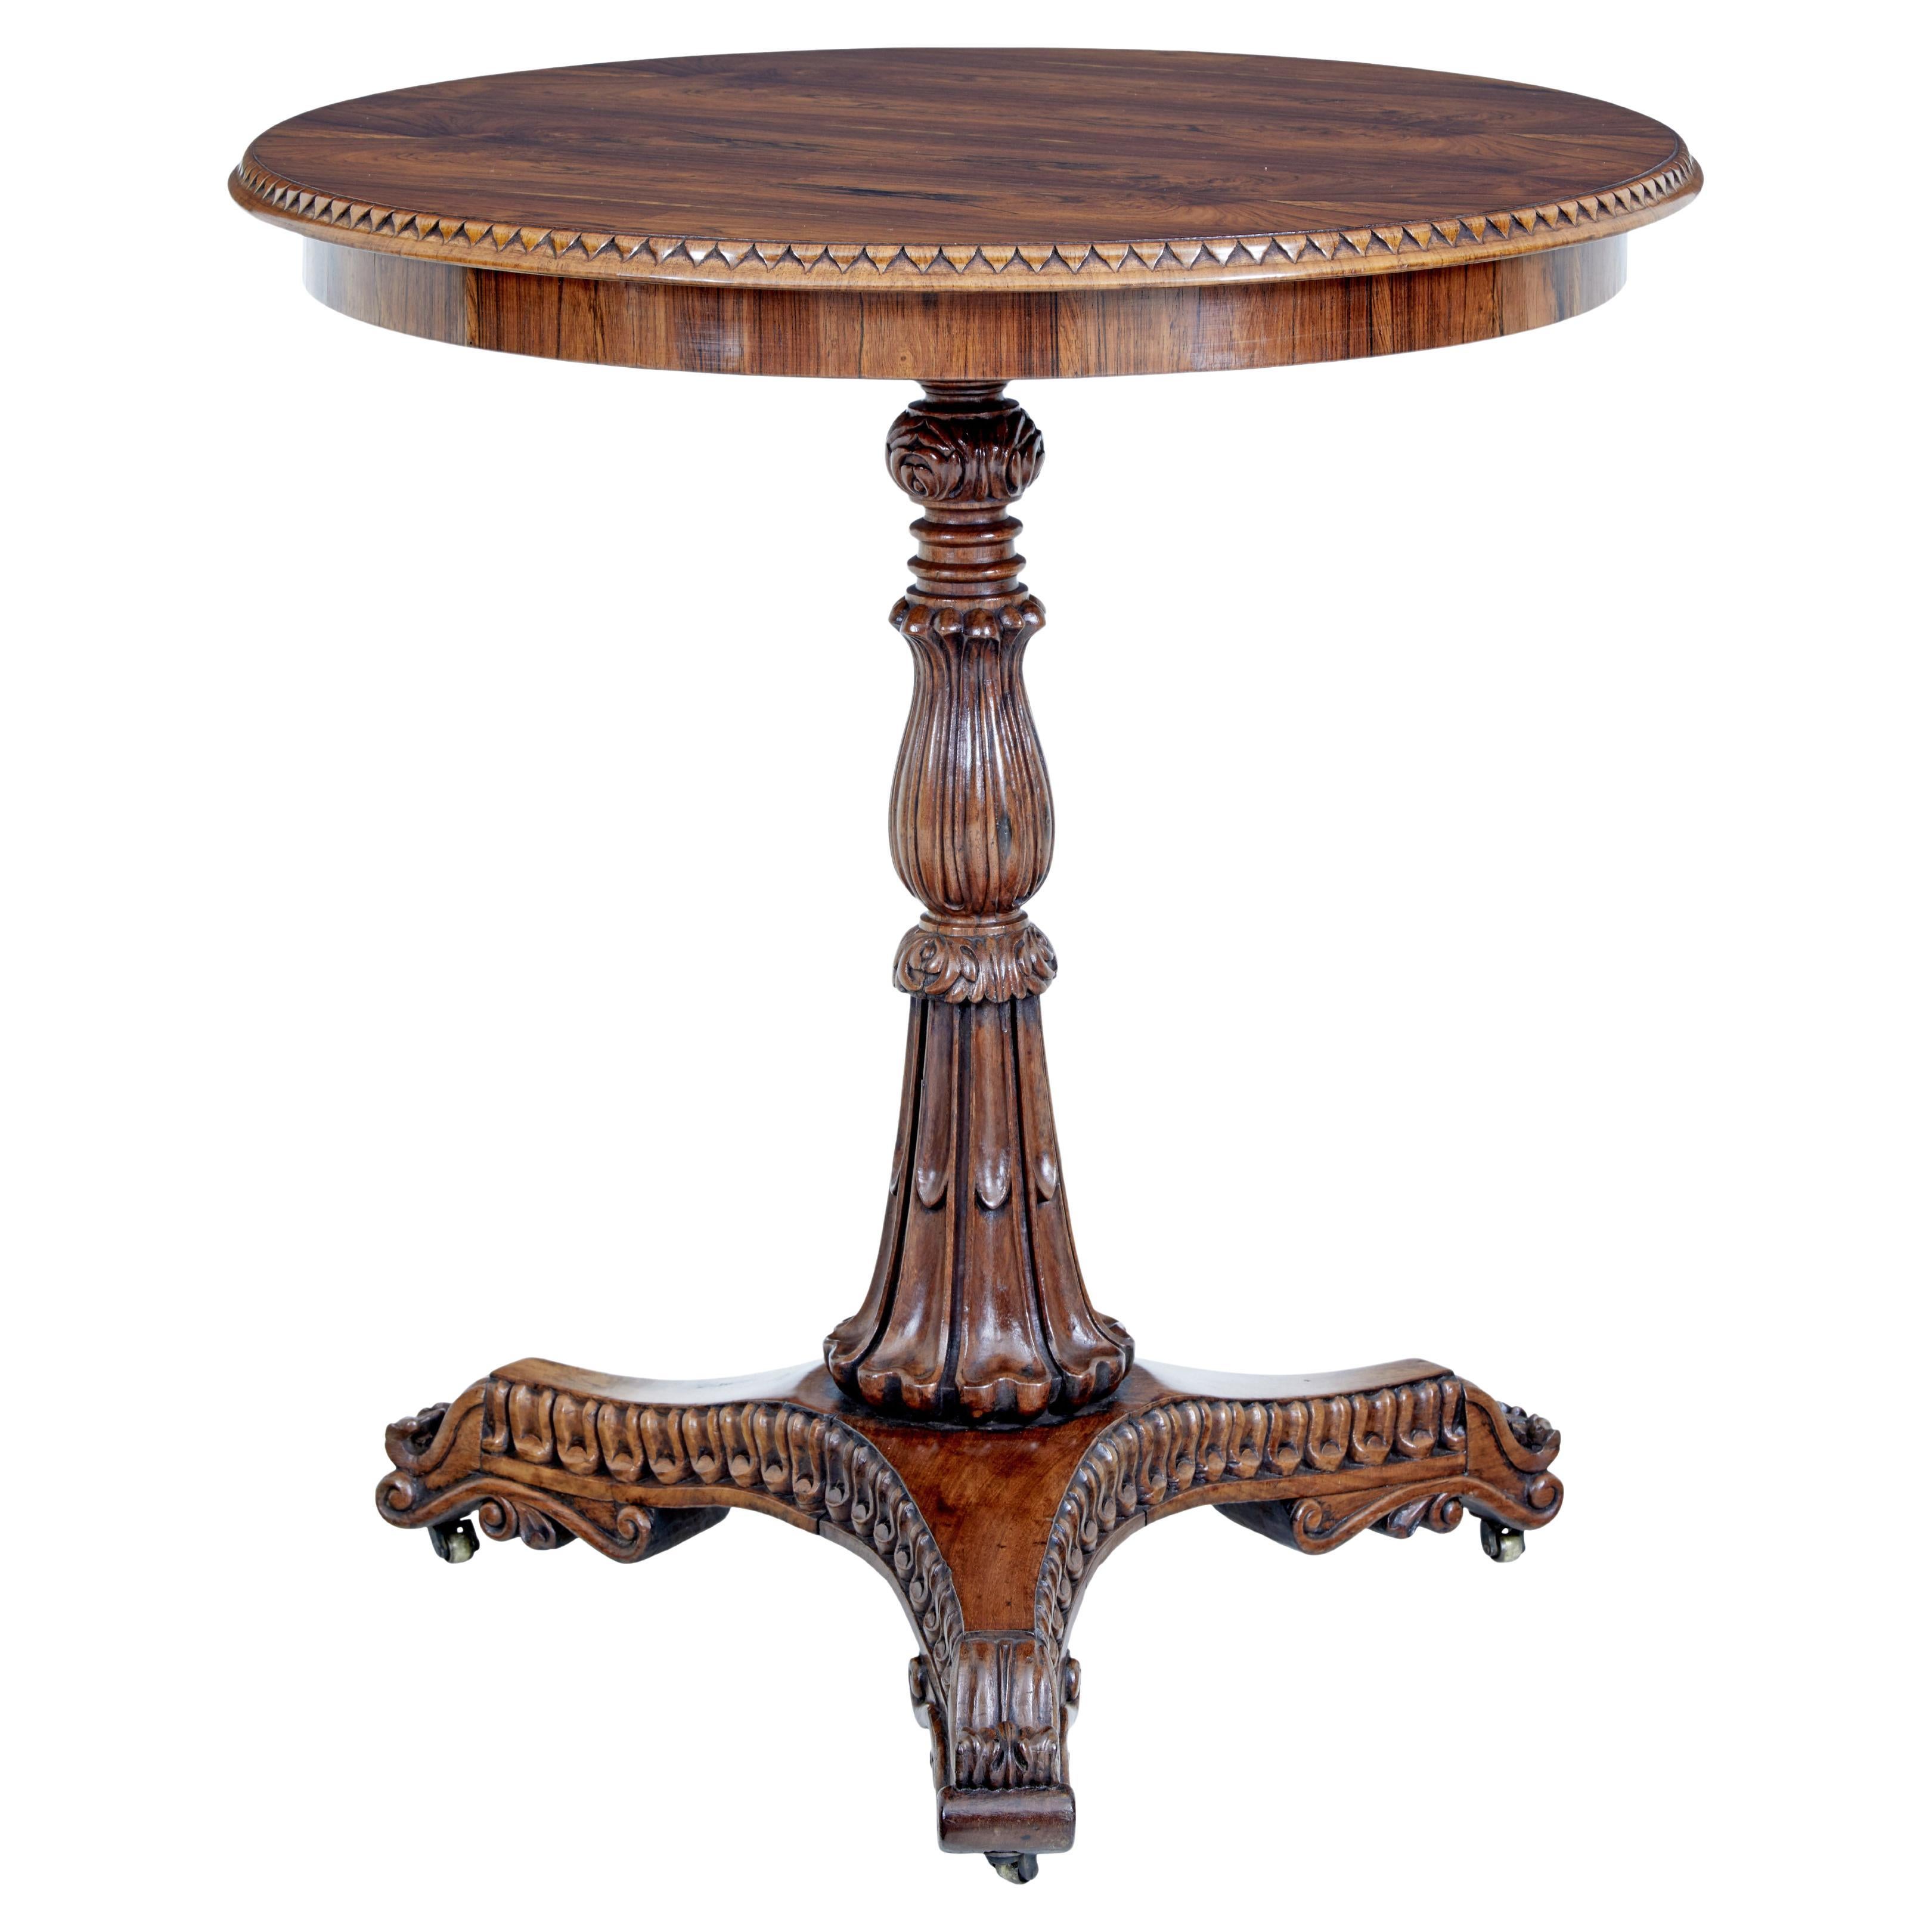 19th Century Carved Regency Walnut Occasional Table